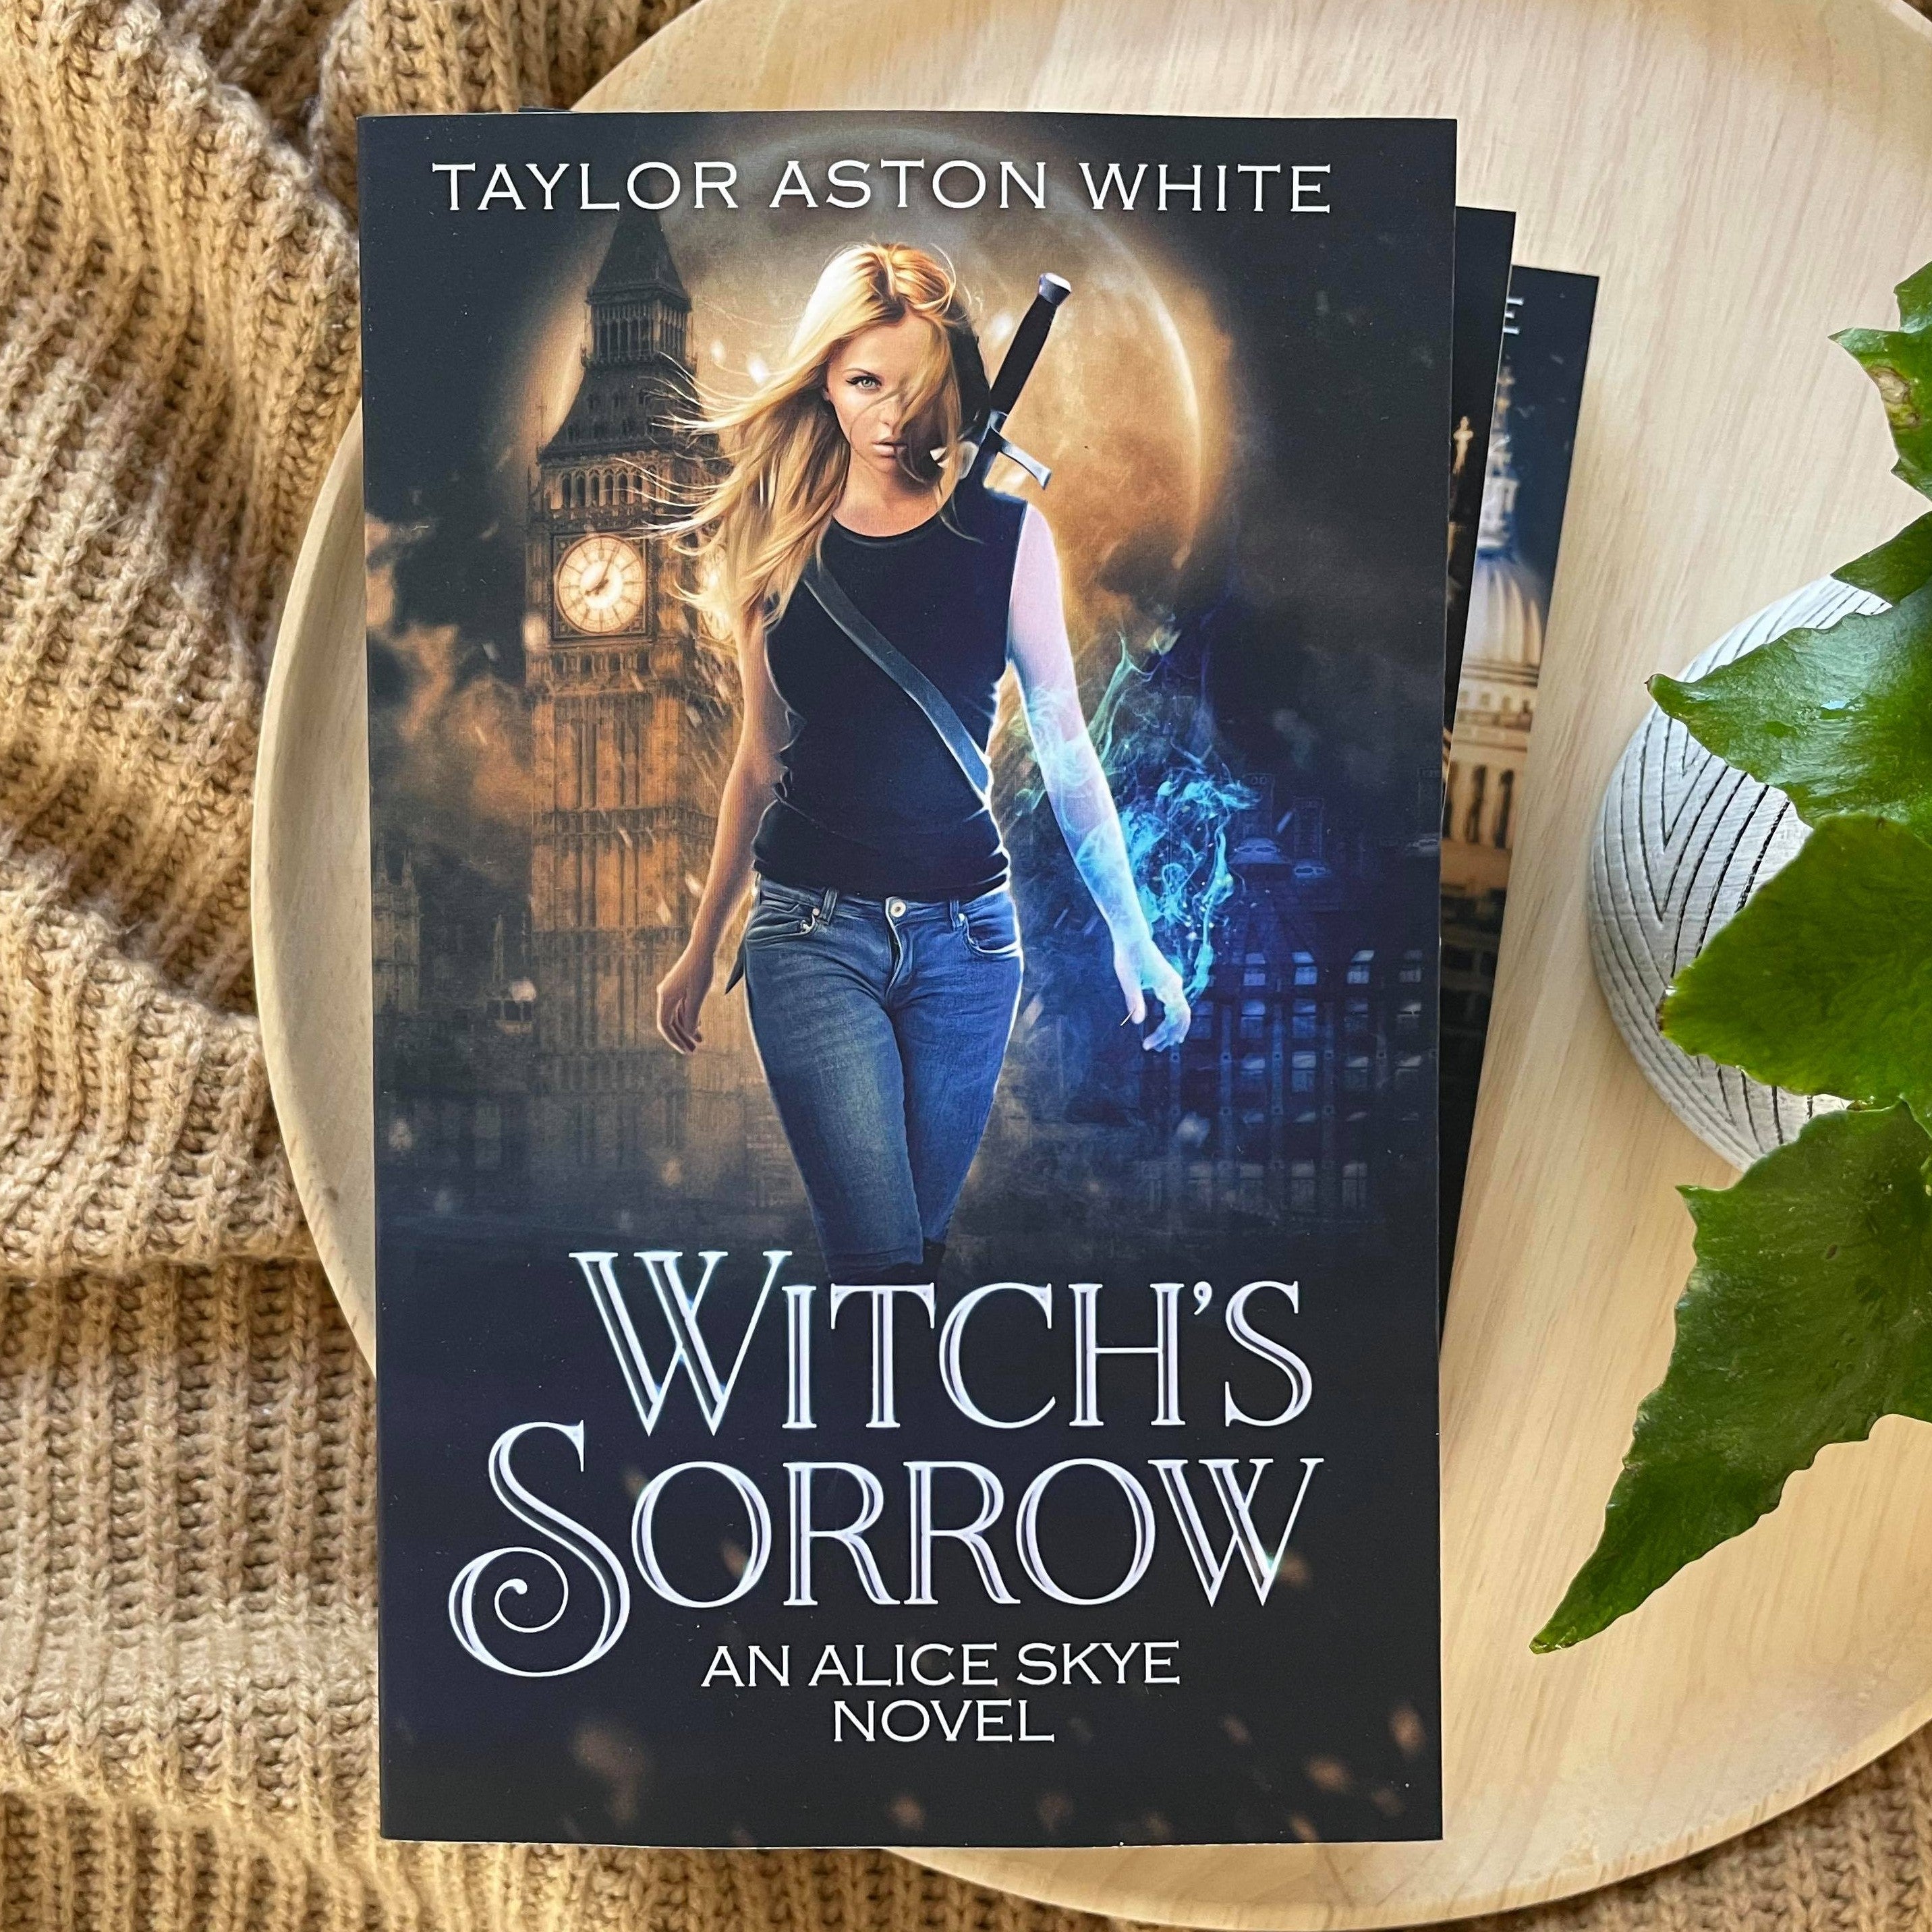 The Alice Skye series by Taylor Aston White